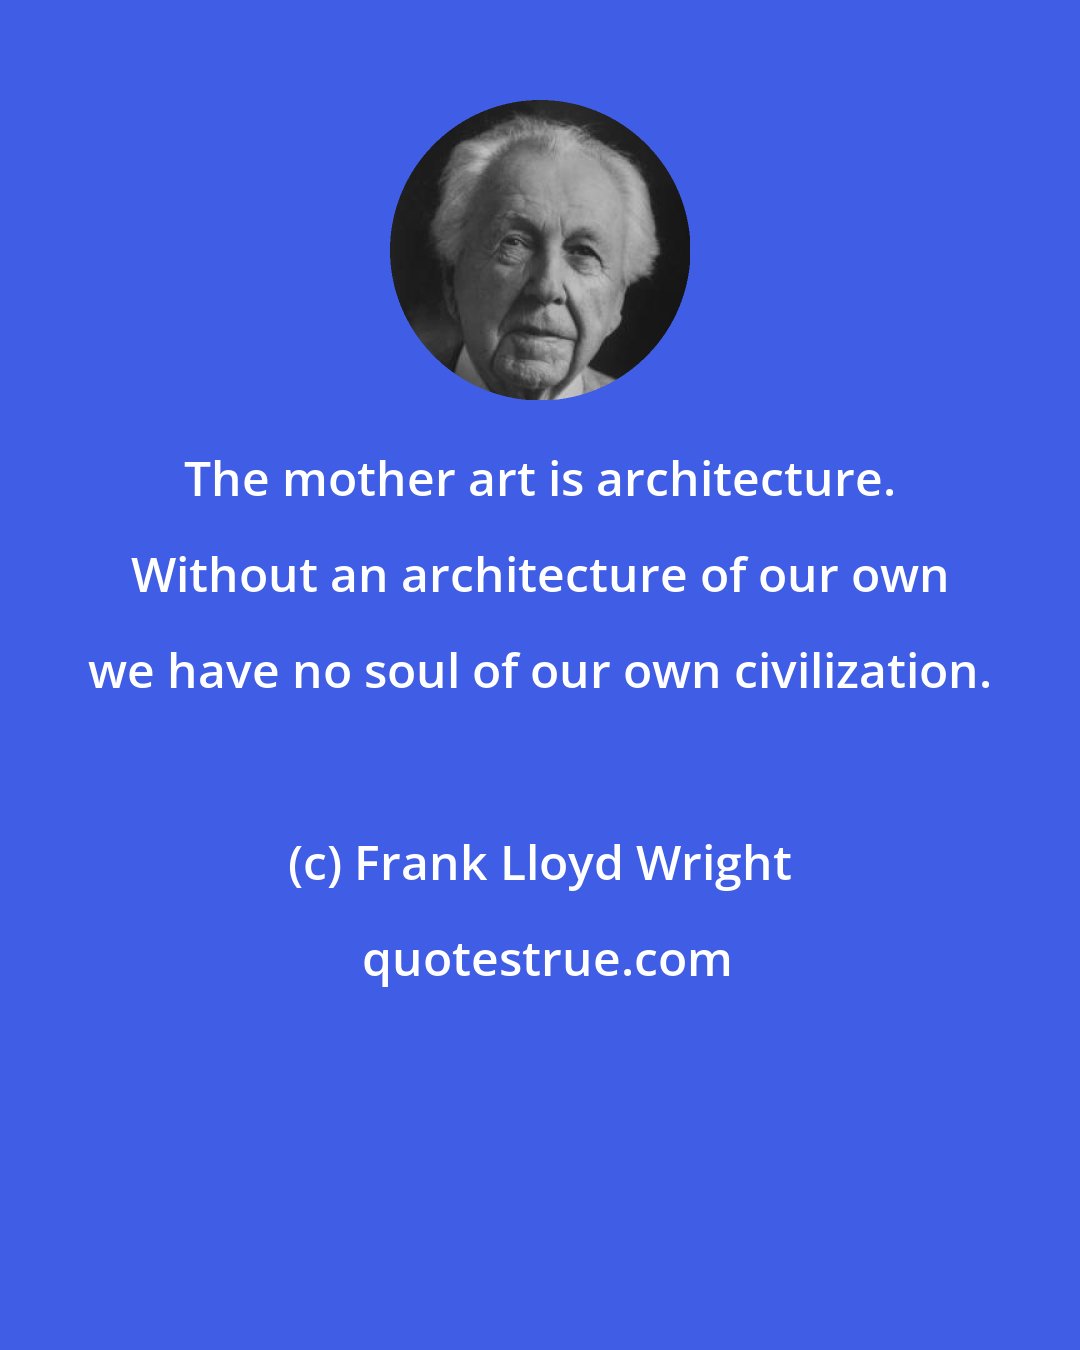 Frank Lloyd Wright: The mother art is architecture. Without an architecture of our own we have no soul of our own civilization.